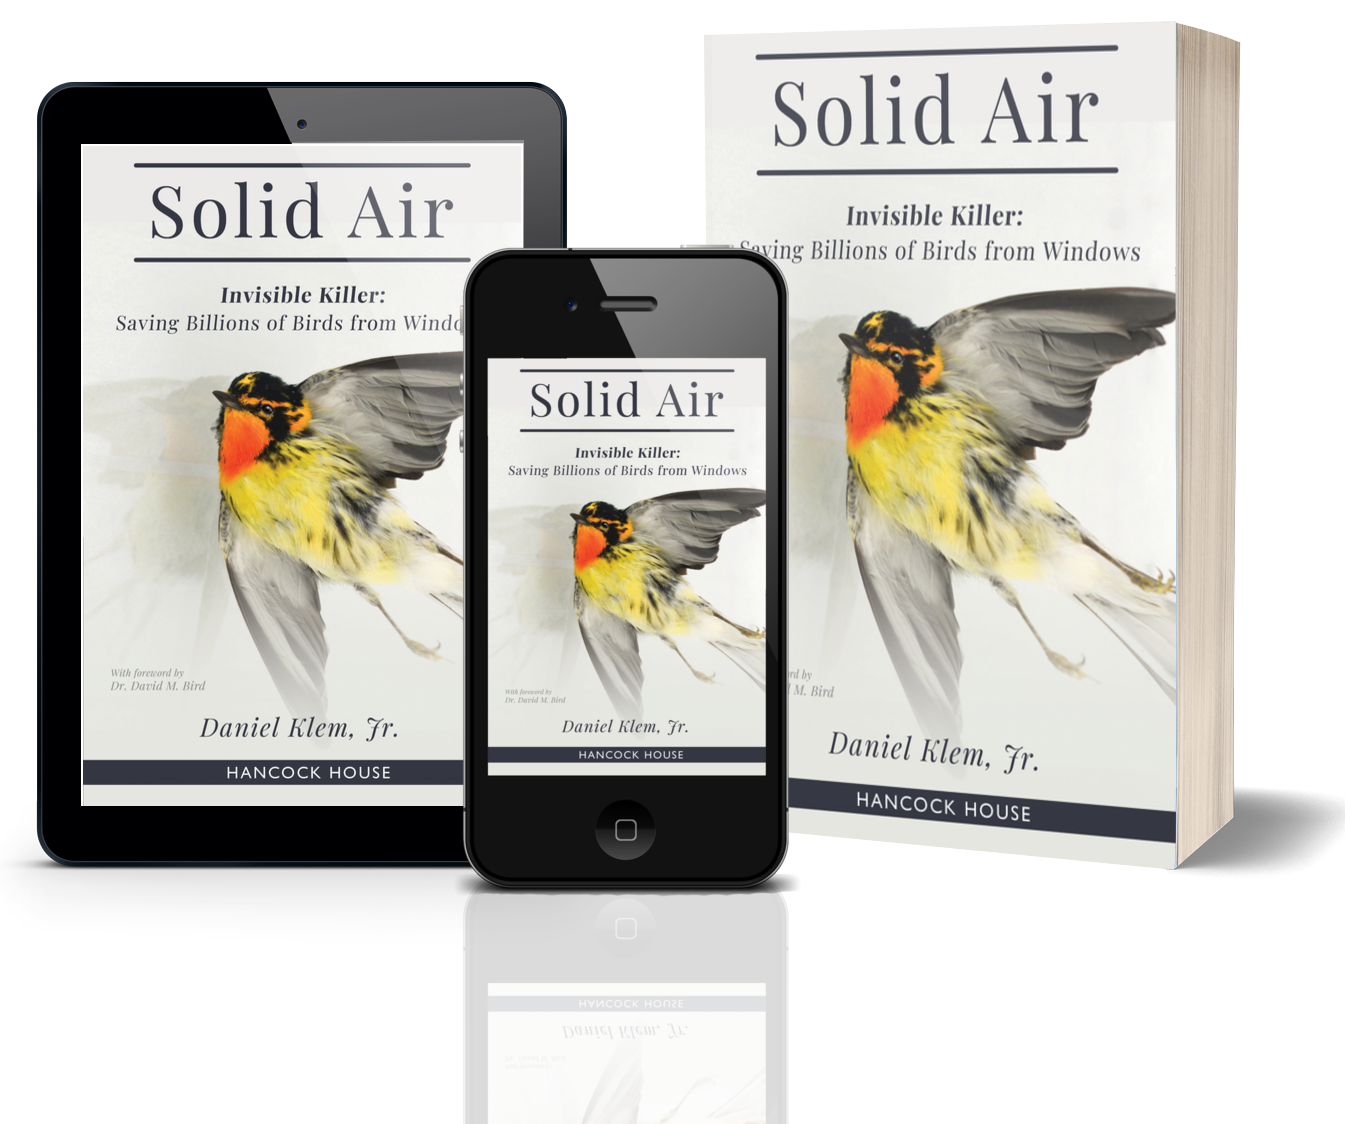 Solid Air: Invisible Killer Saving Billions of Birds from Windows